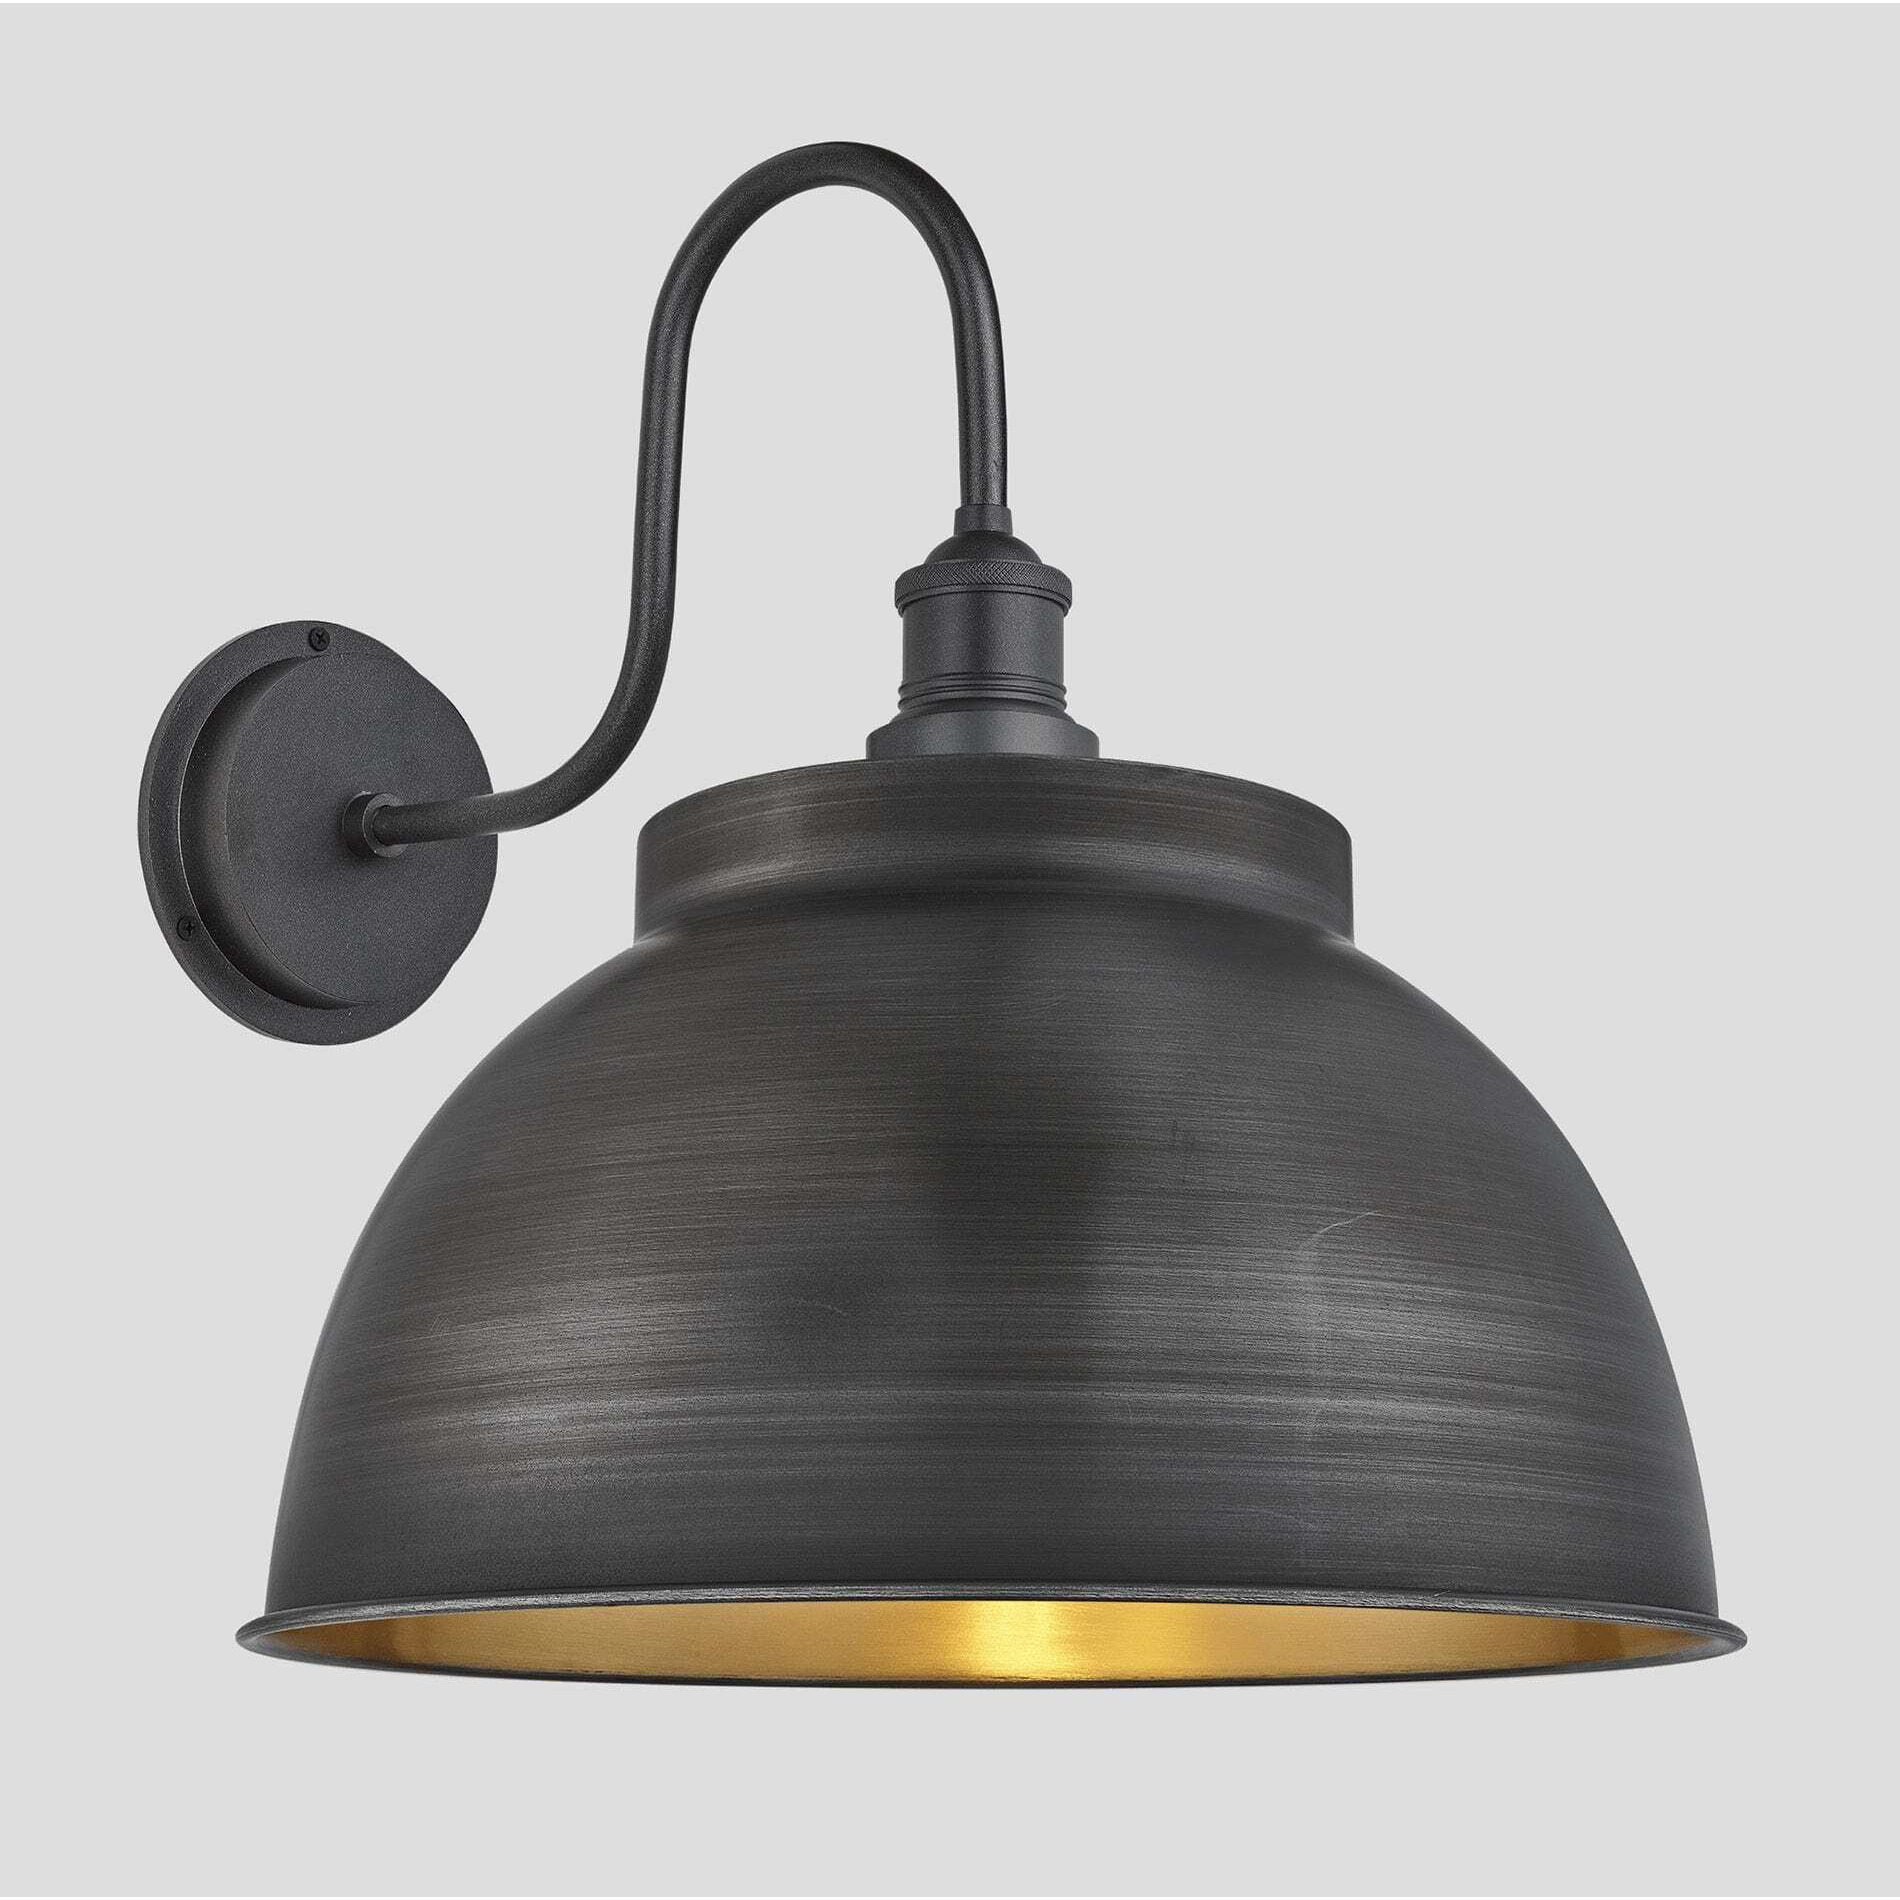 Swan Neck Outdoor & Bathroom Dome Wall Light - 17 Inch - Pewter & Brass